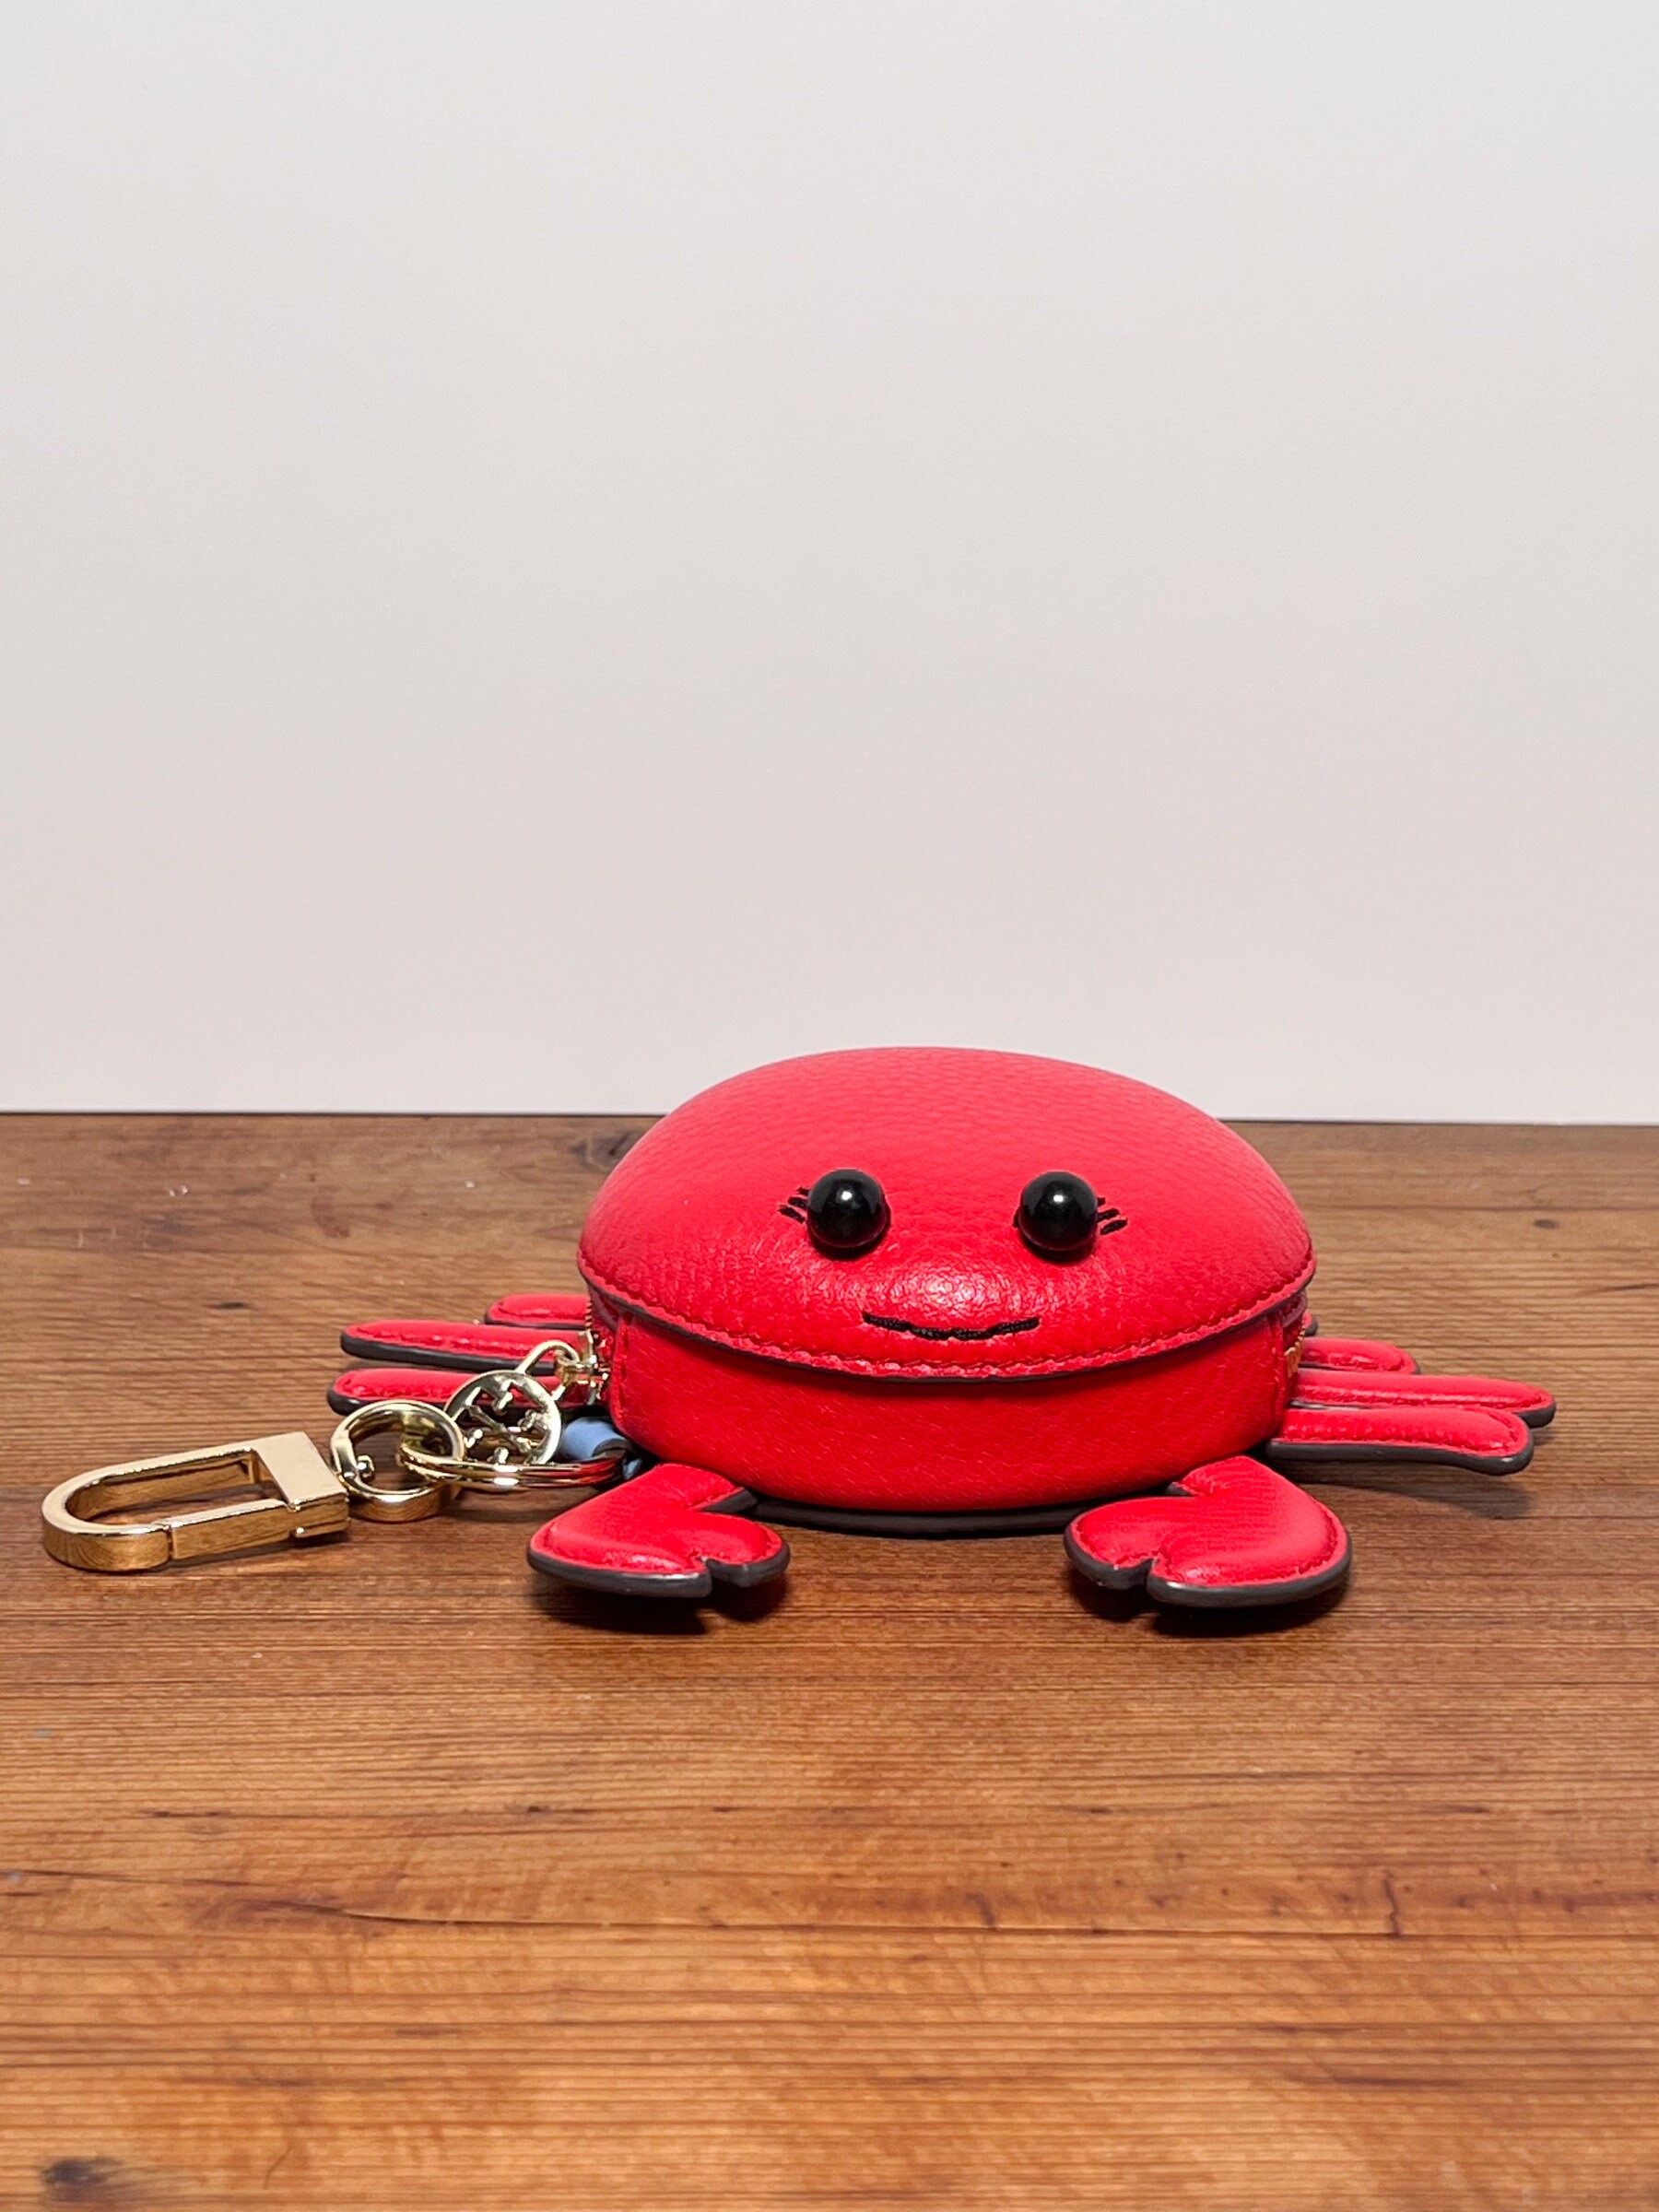 Tory Burch Red Leather Crab Coin Purse With Keychain - Etsy